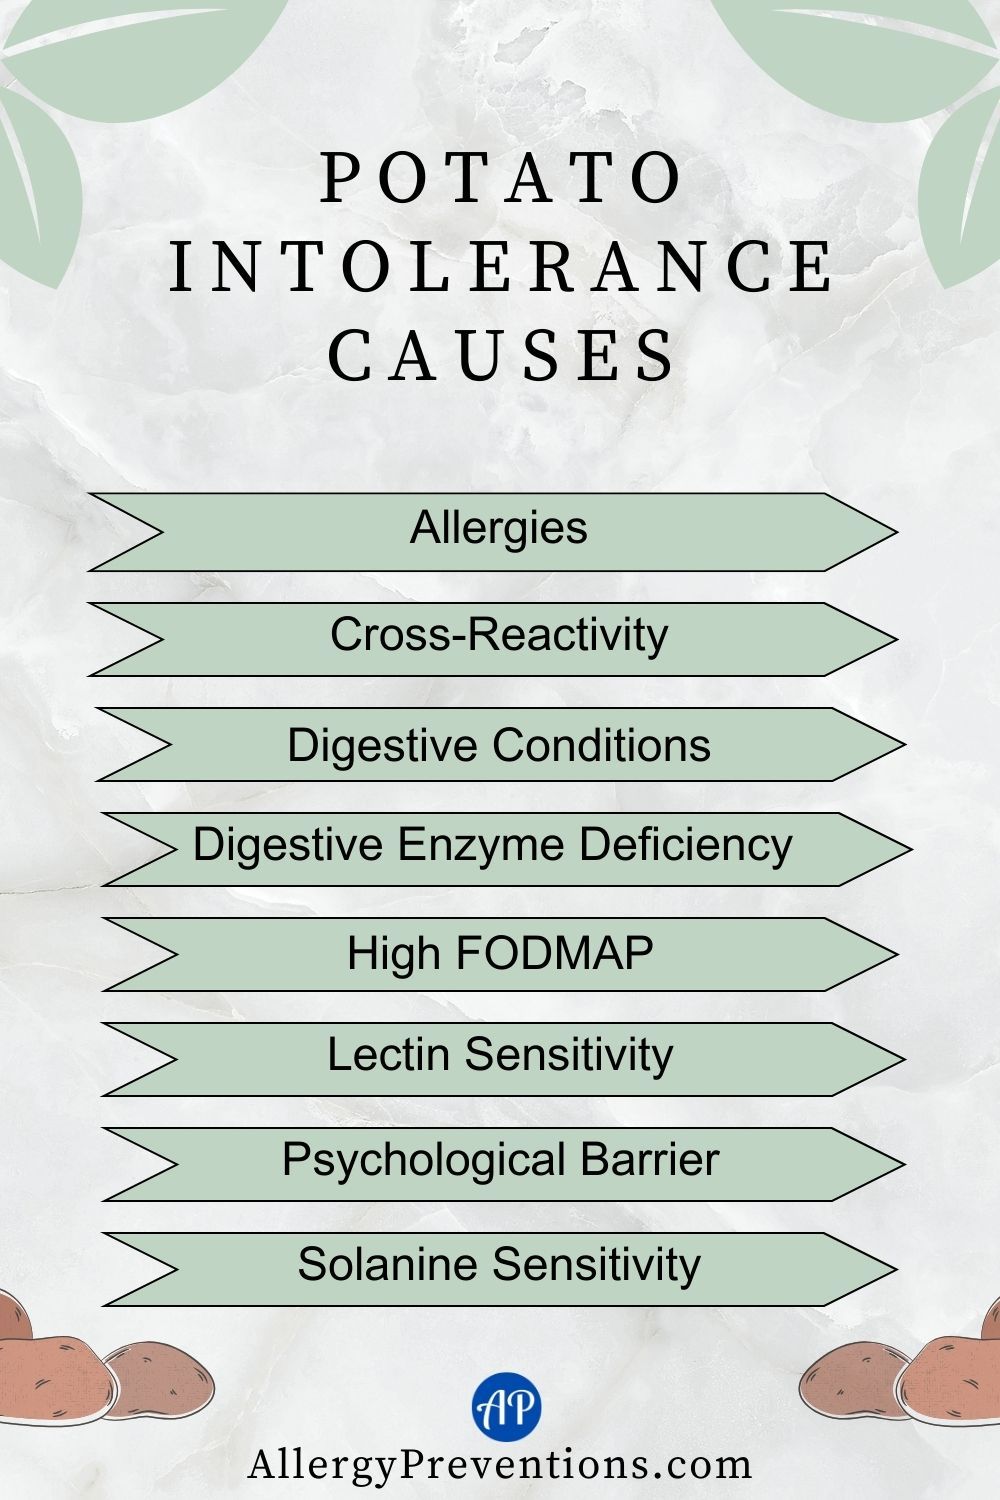 Potato intolerance causes infographic: Allergies, cross-reactivity, digestive conditions, digestive enzyme deficiency, high FODMAP, lectin sensitivity, psychological barrier, and solanine sensitivity.